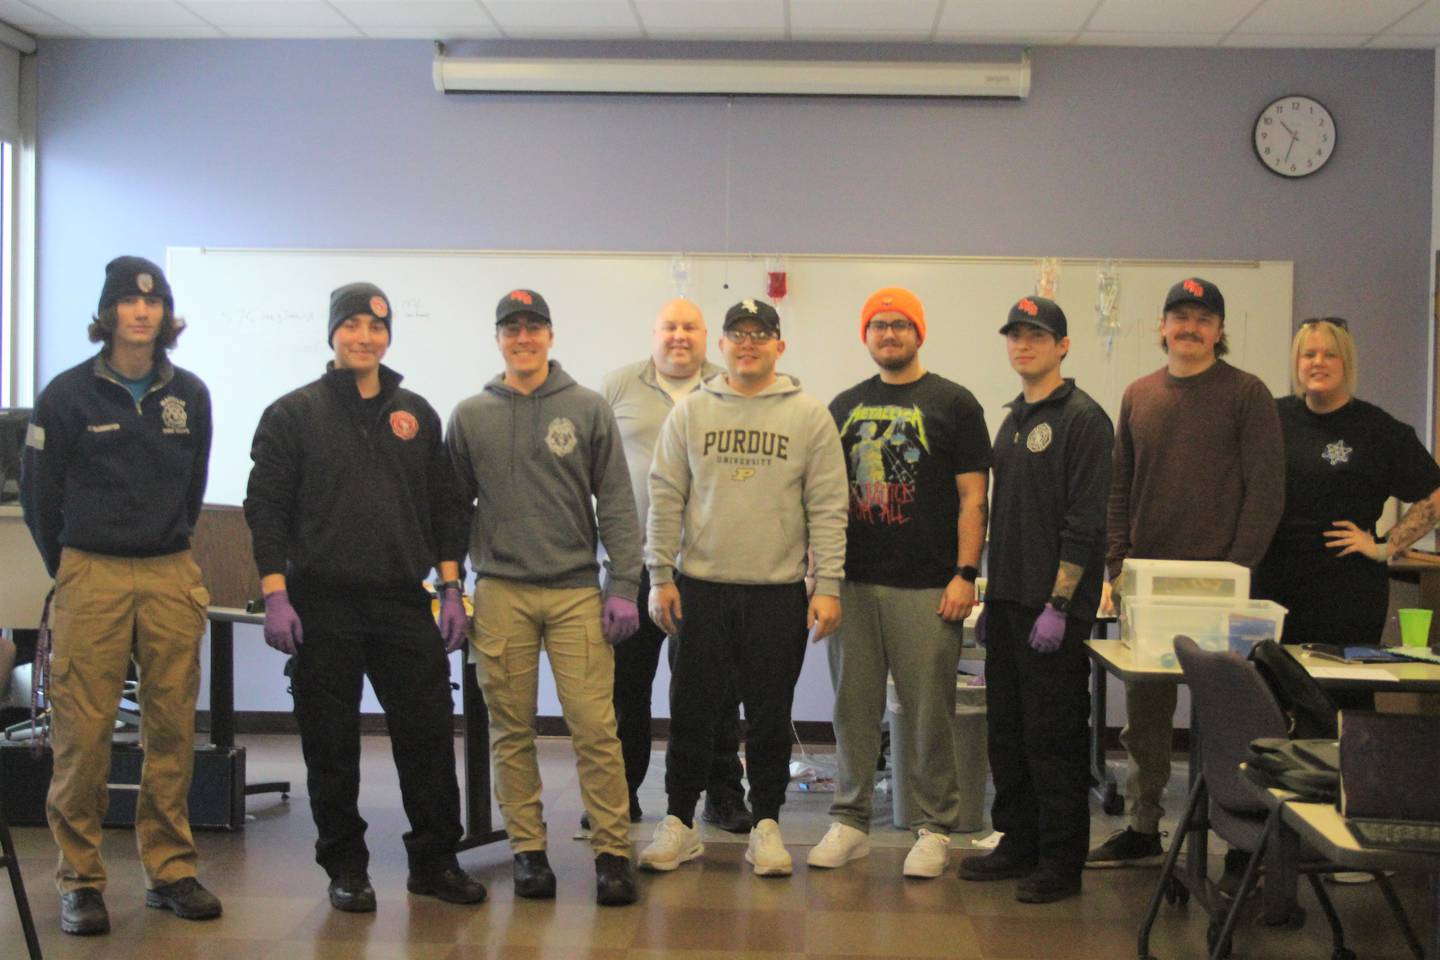 Area fire and ambulance personnel in the Illinois Valley Community College paramedic program at Ottawa Center are (from left) Clayton Wellenreiter, Tristen Beck, Caleb Beck, instructor Nick Fish, Tyler Walsh, Brady Mitchell, Brandon Bice, Dylan Kimak and Lauren Bangert.